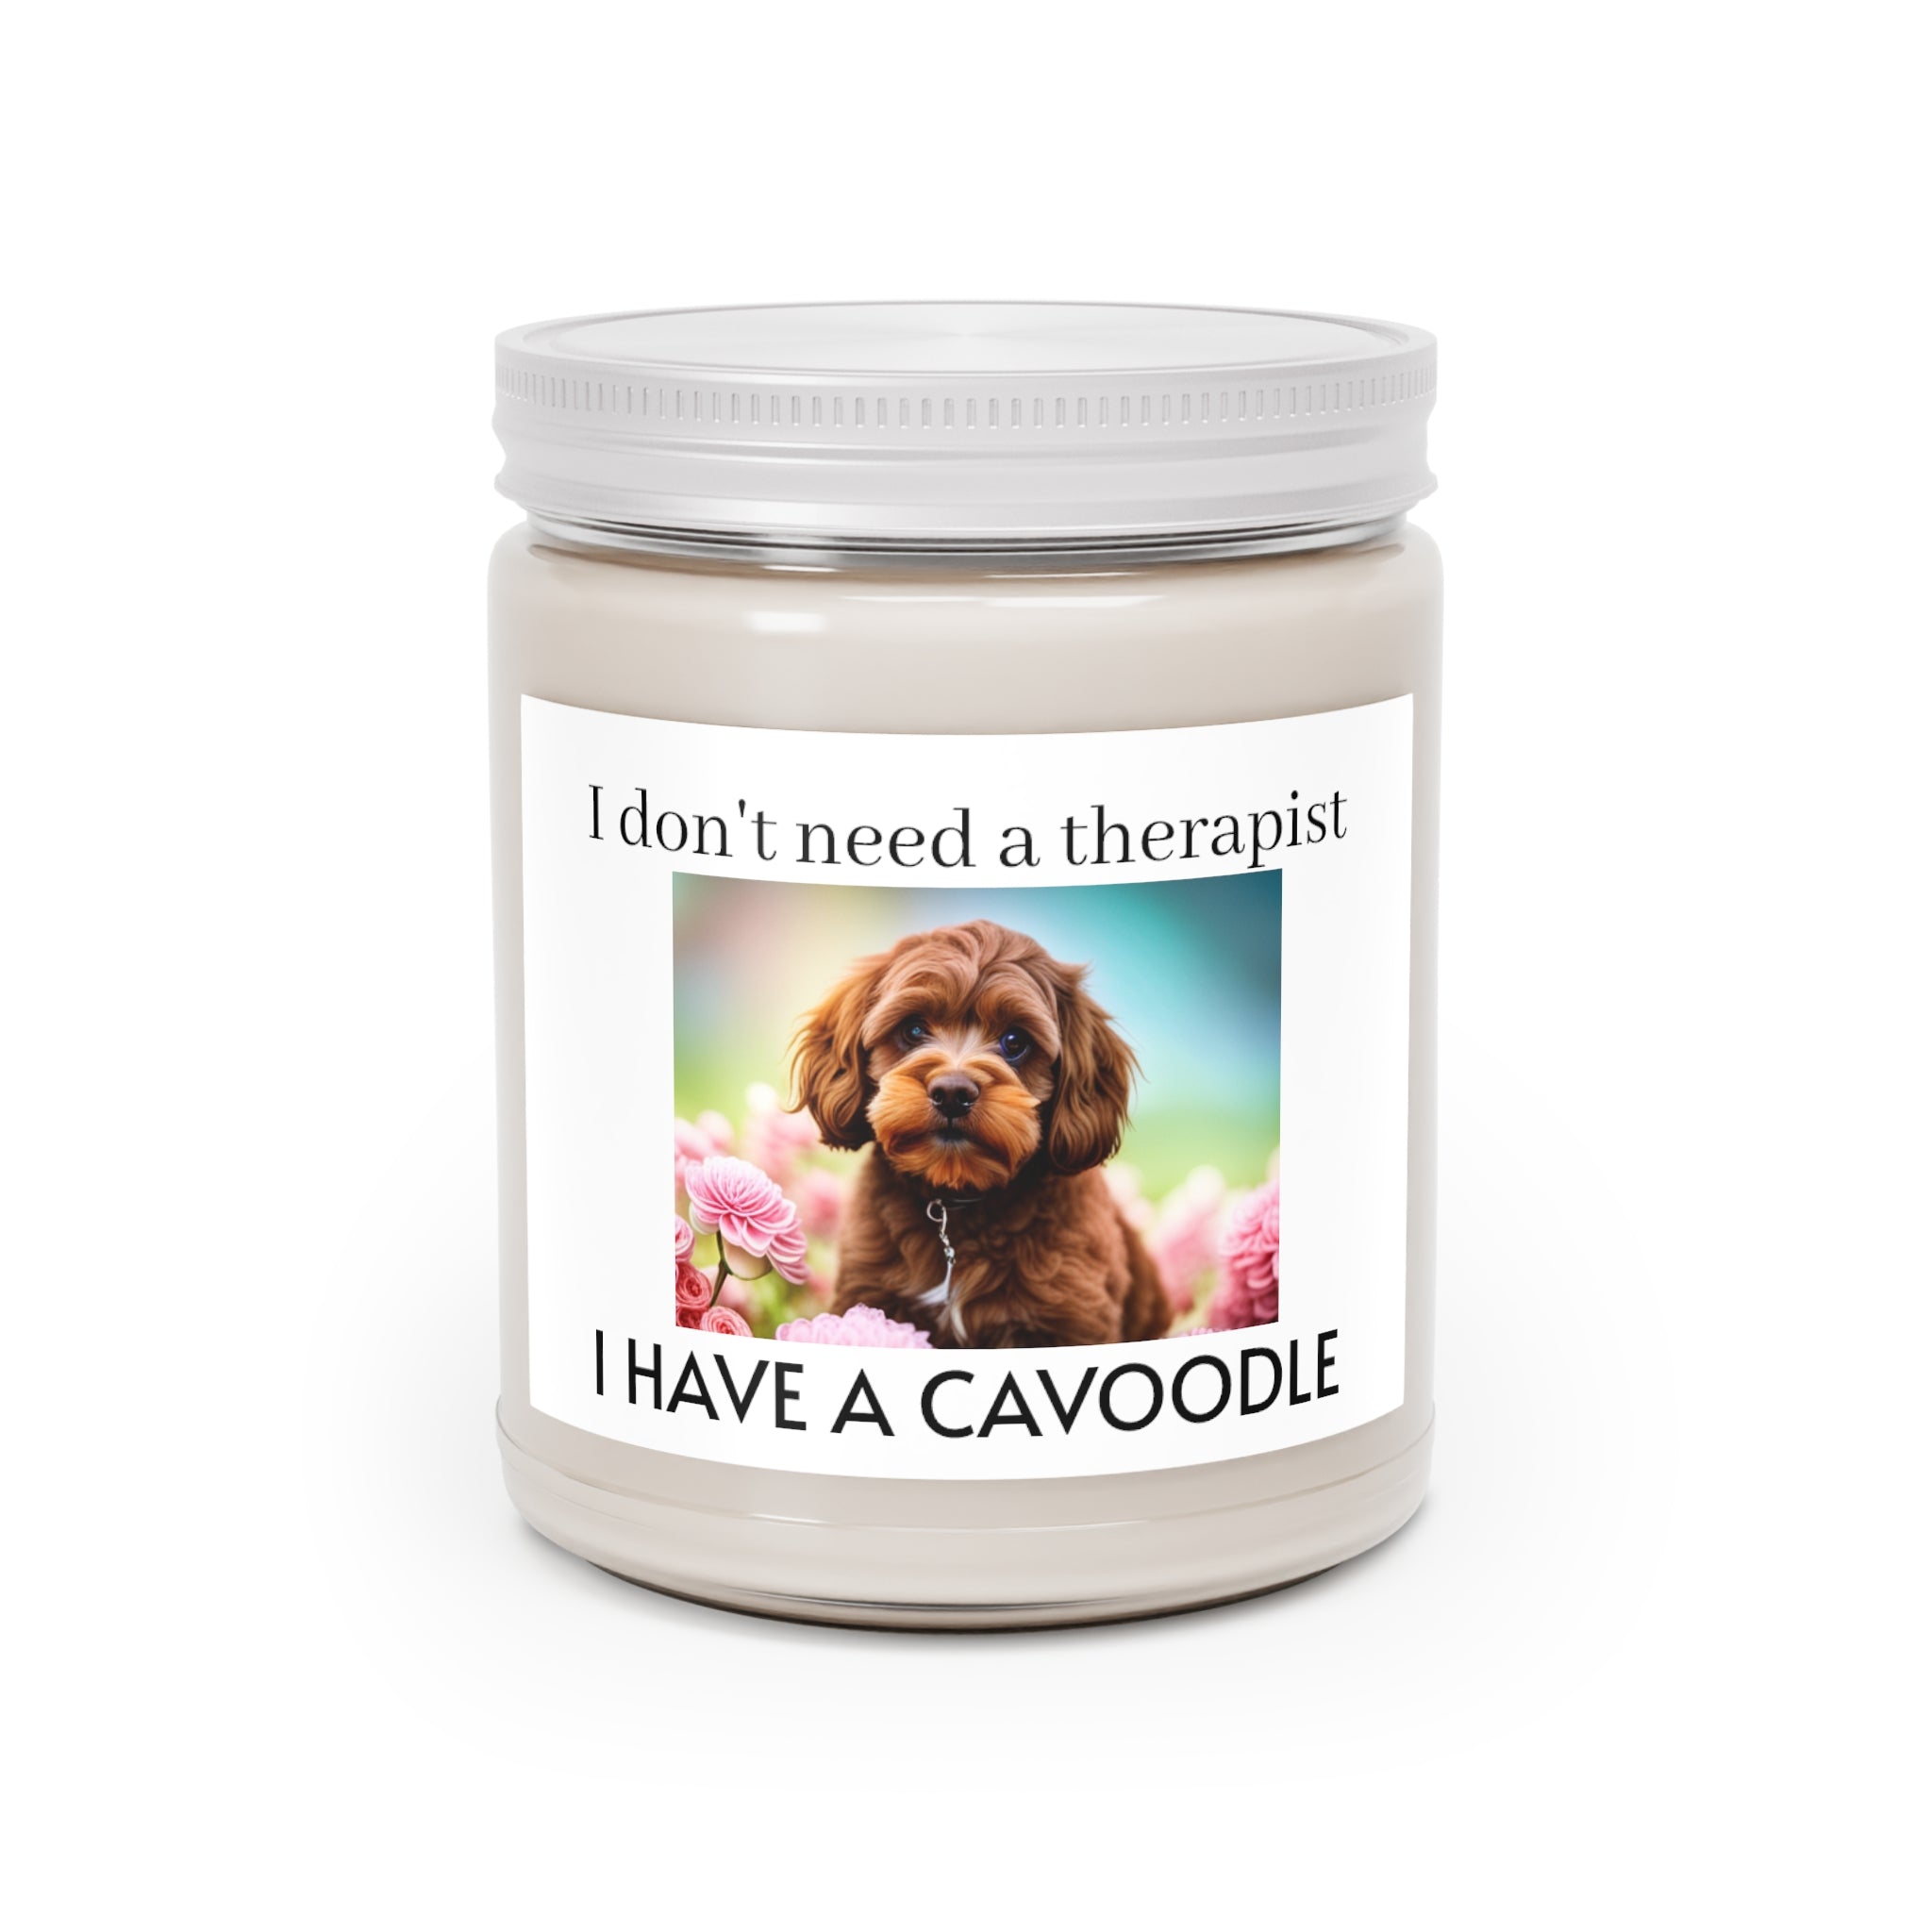 Brown Cavoodle Themed Scented Candles, 255g